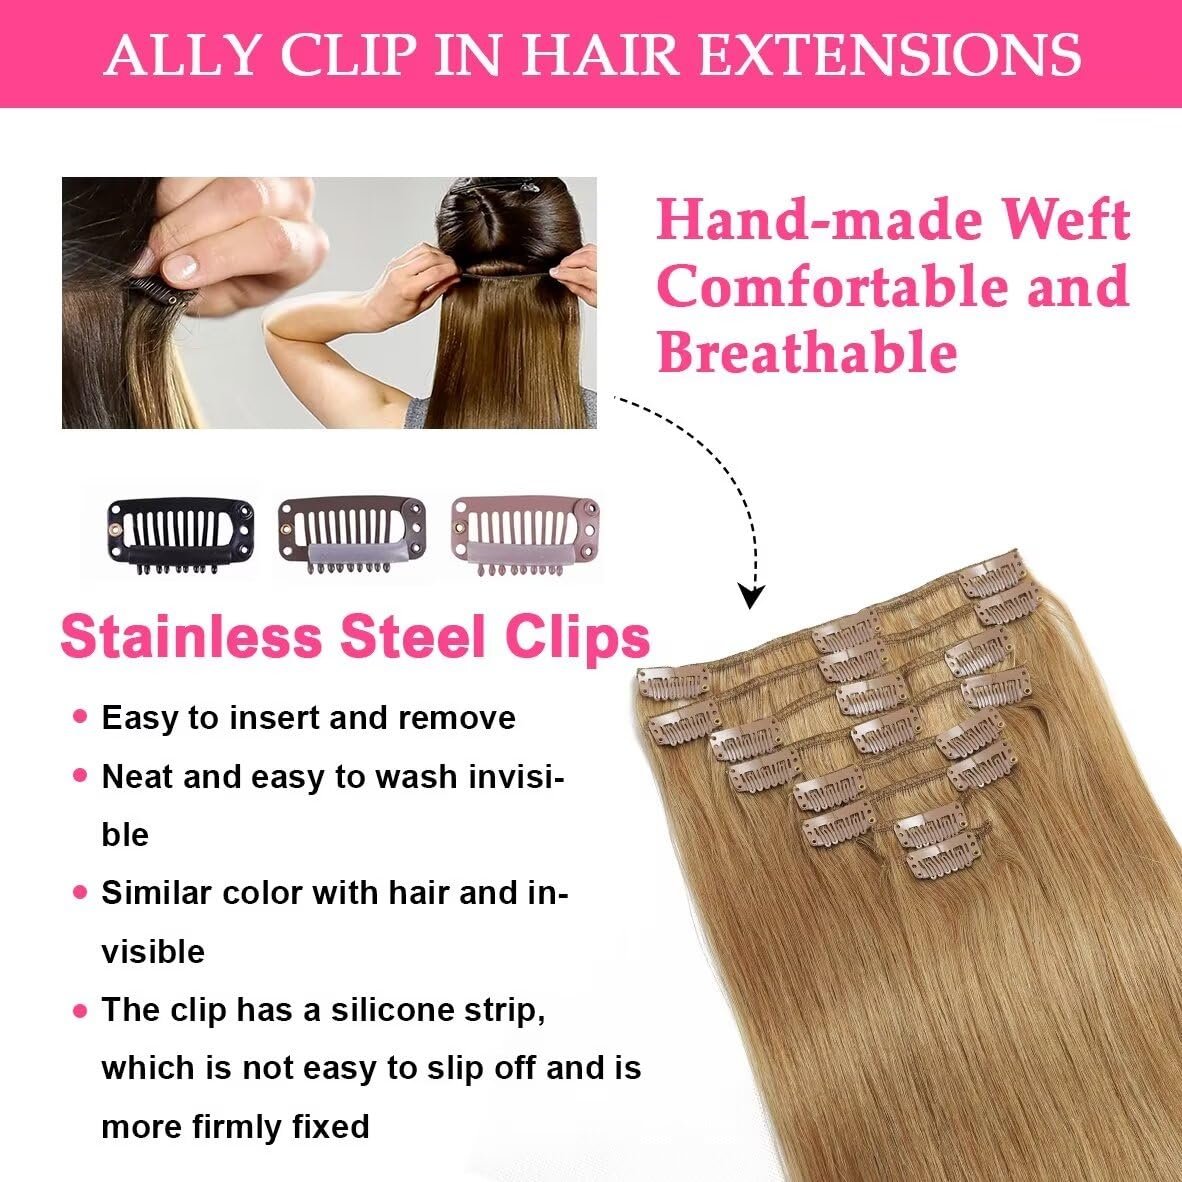 Brazilian Remy Human Hair Extensions Review